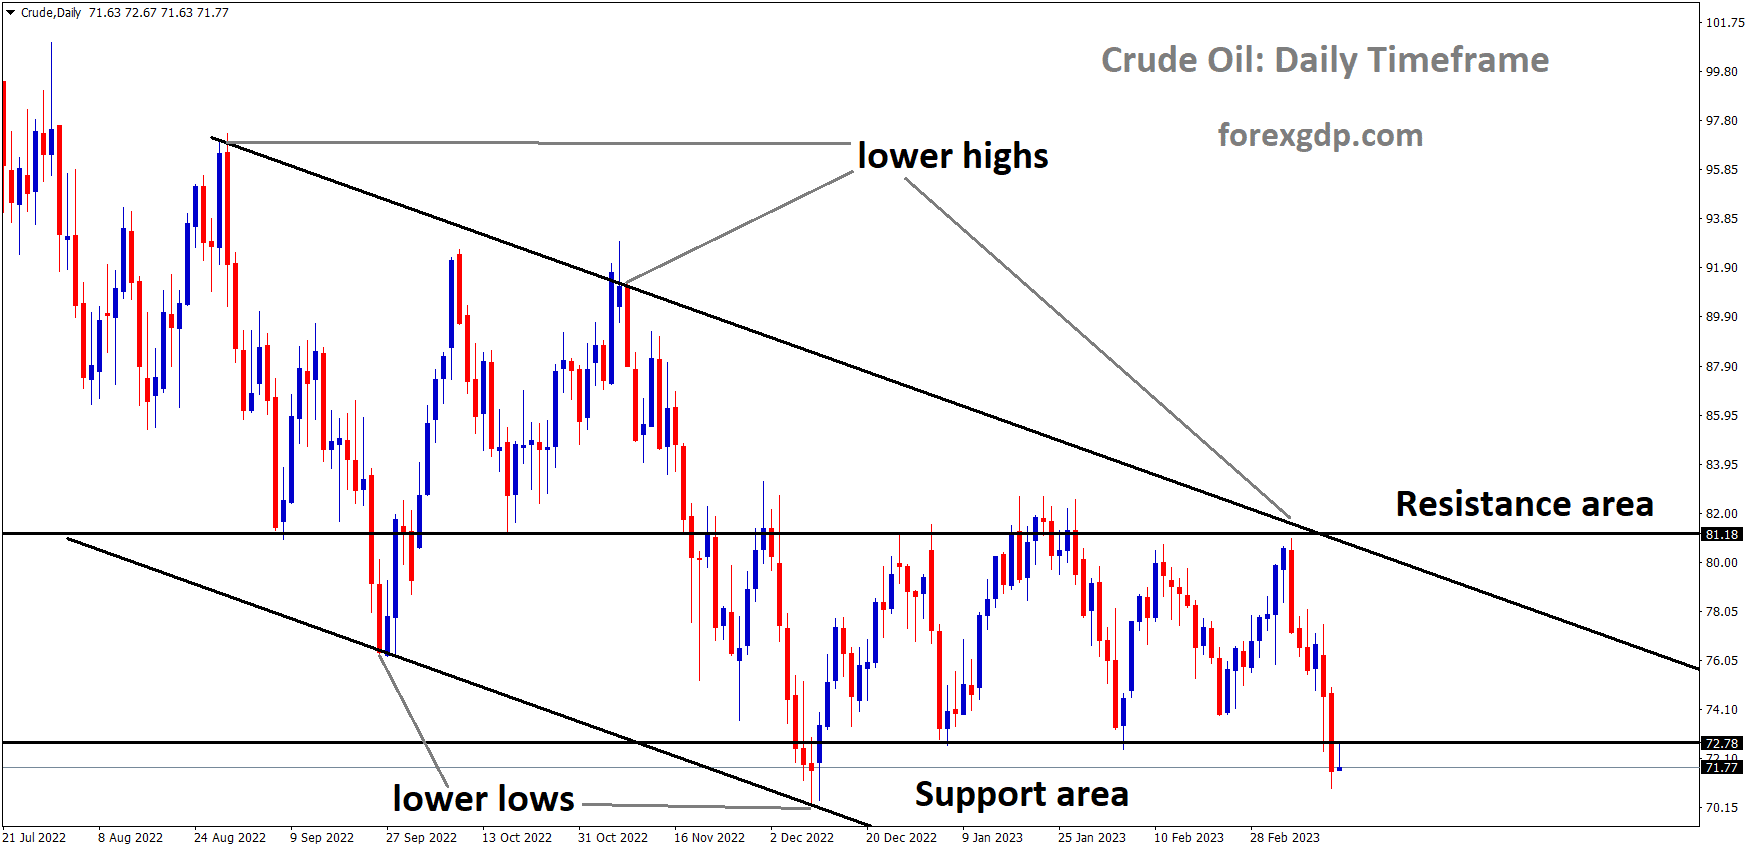 Crude oil is moving in the Descending channel and the market has reached the horizontal support area of the minor Box pattern under the channel